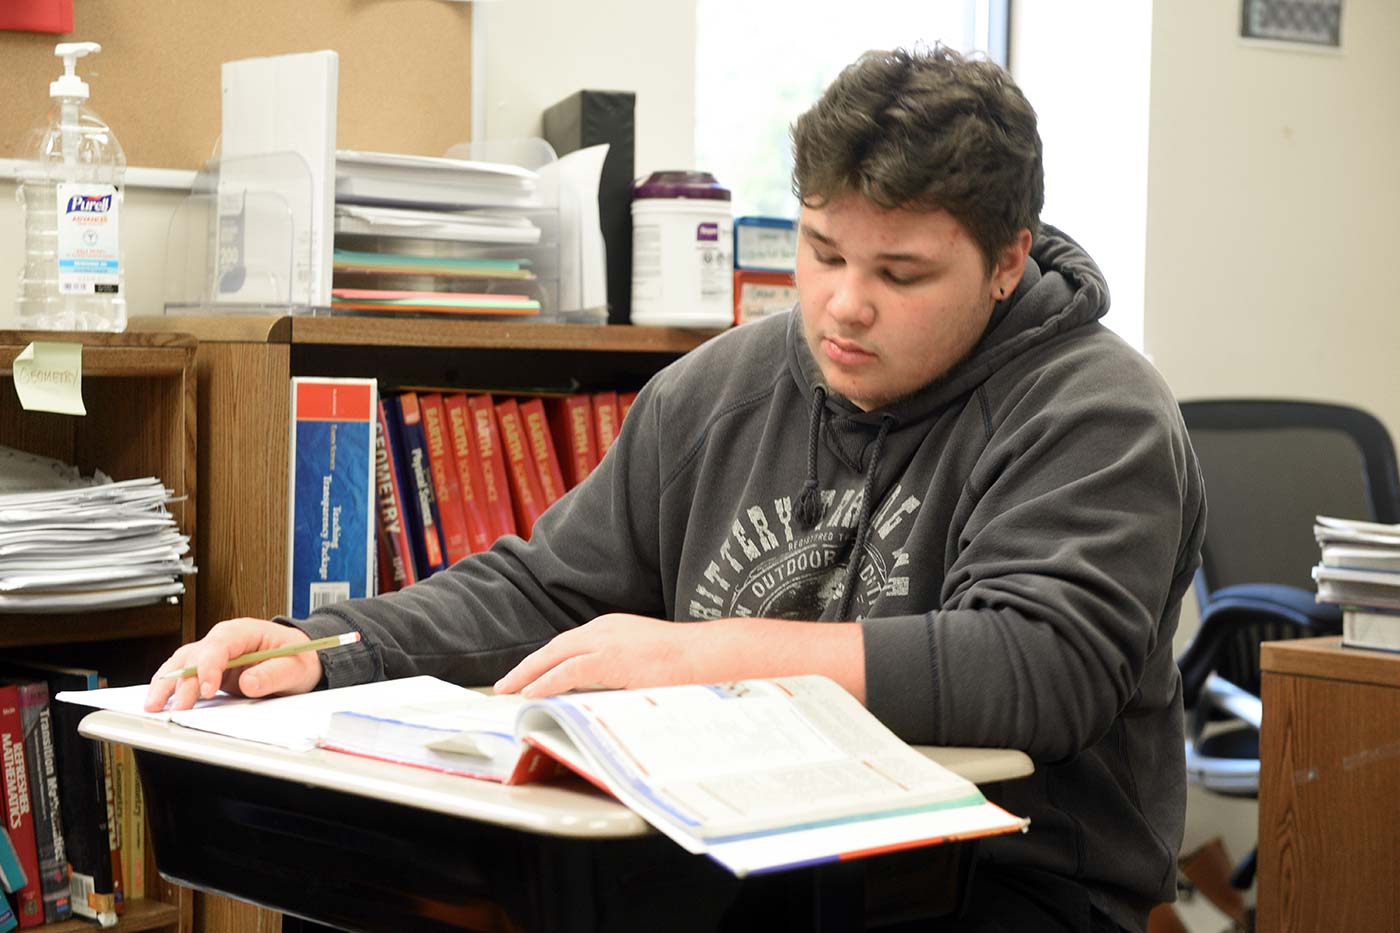 Natchaug student reads a textbook and takes notes